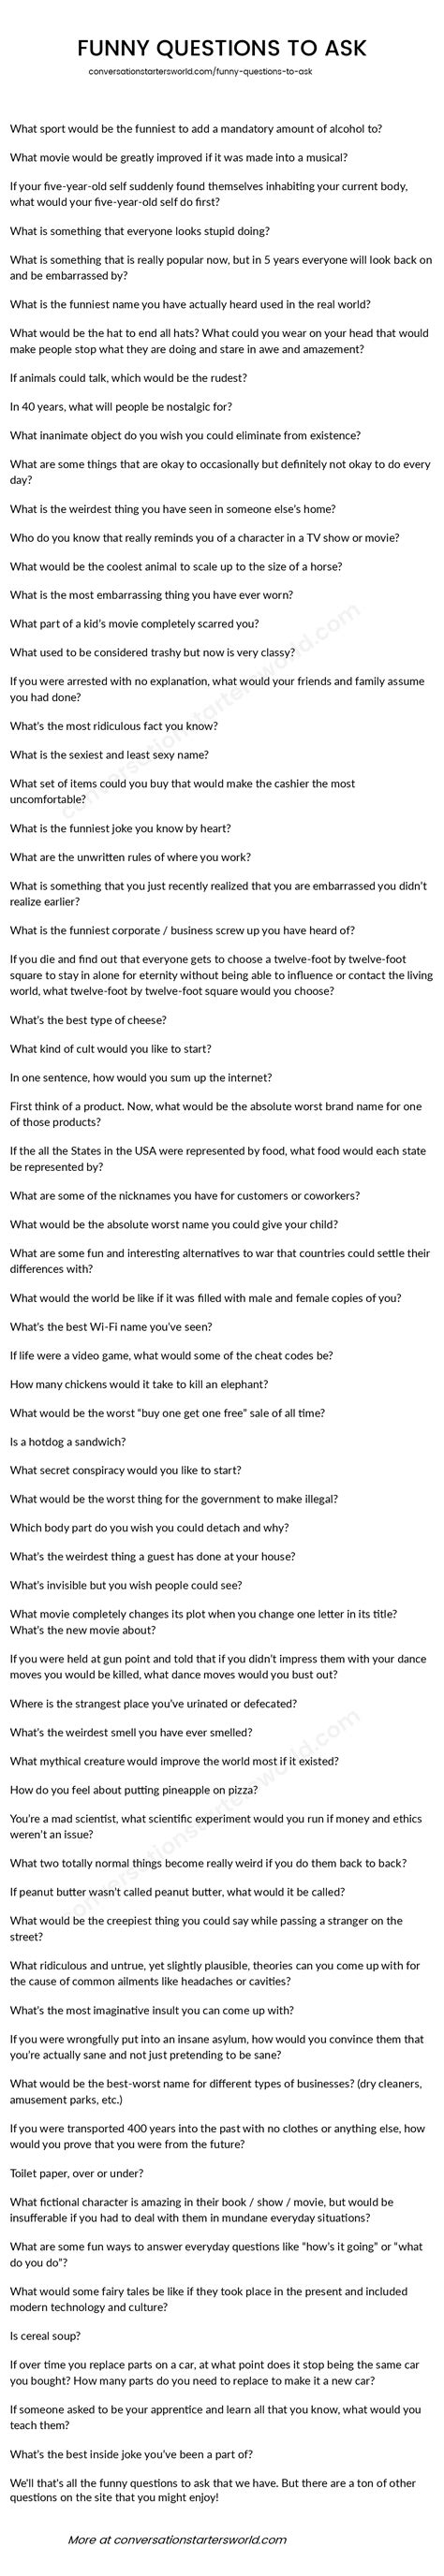 Funny Questions To Ask Get Ready For A Hilarious Conversation In 2020